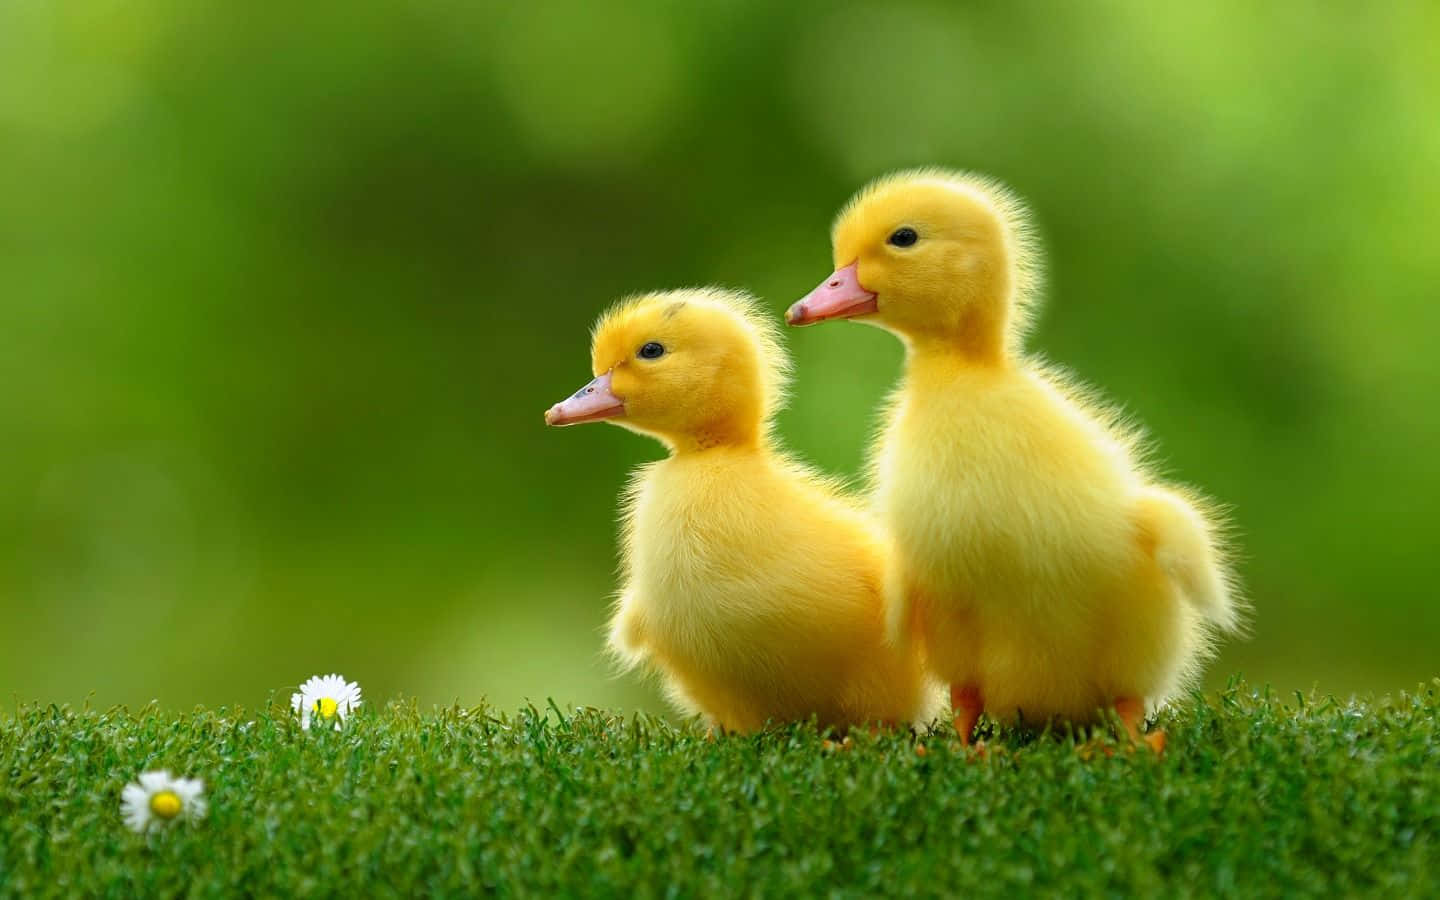 Look At This Adorable Cute Duck!